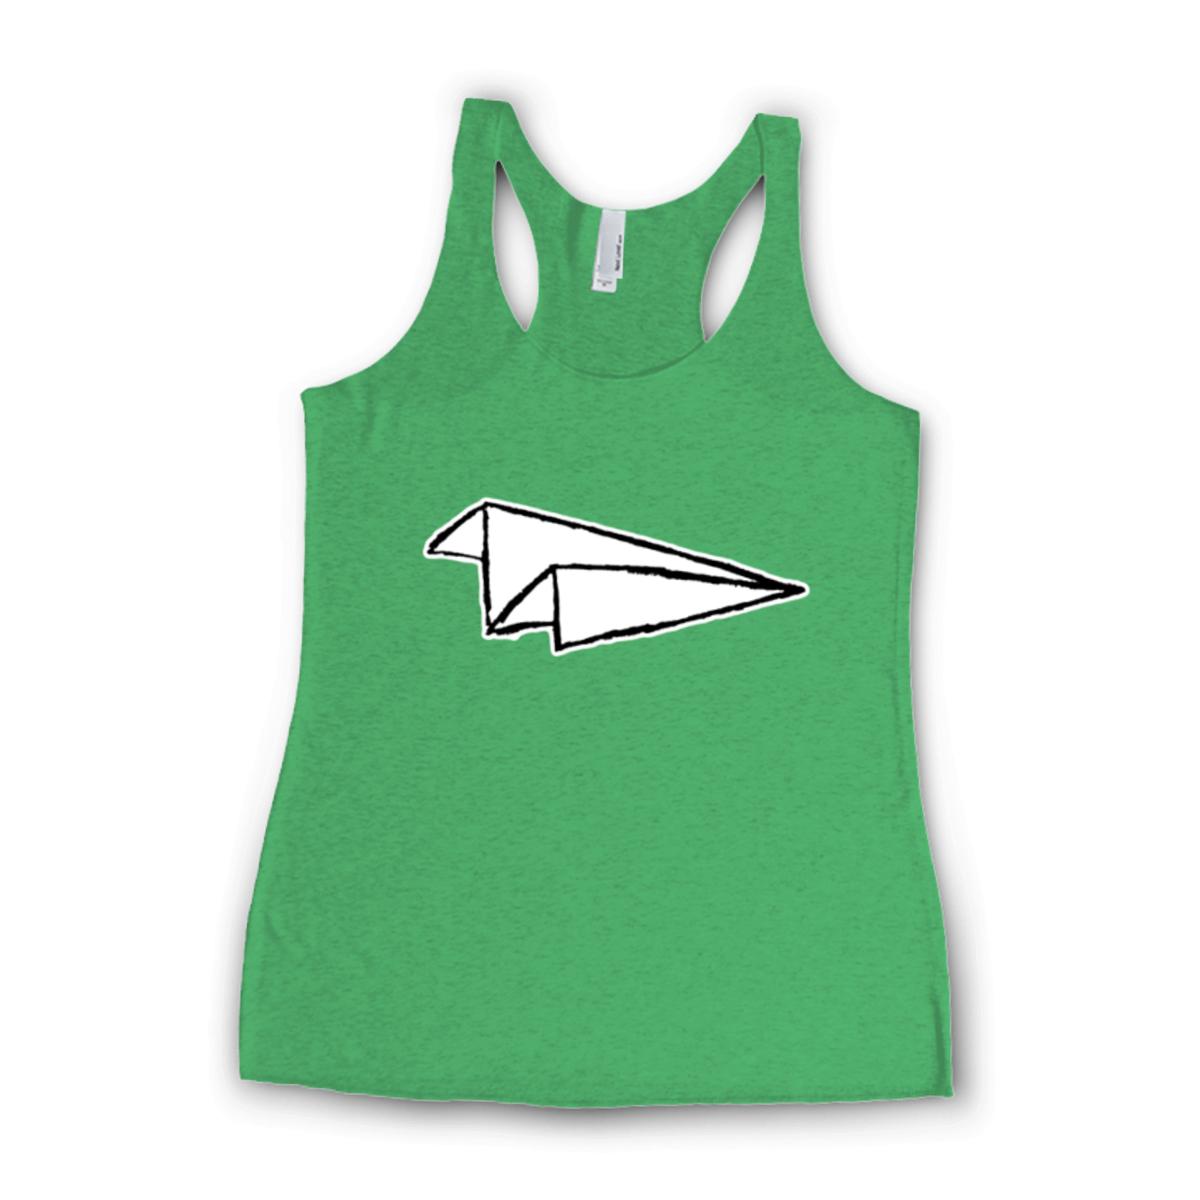 Airplane Sketch Ladies' Racerback Tank Extra Small envy-green